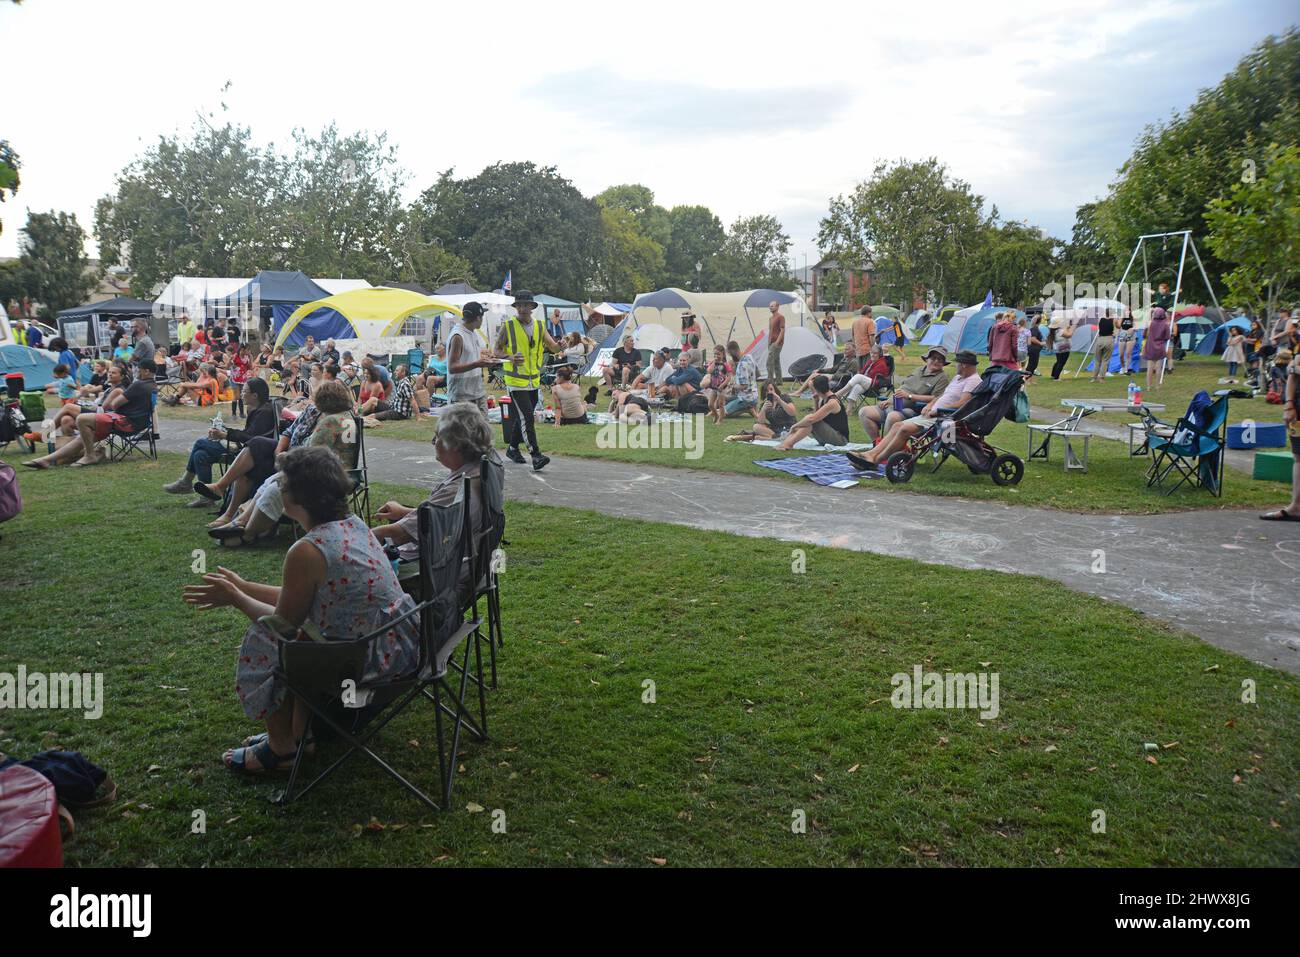 Christchurch, New Zealand, February 22, 2021: A crowd gathers for a music performance at the Cranmer Square mandate protest in Christchurch. Activists pitched tents and occupied the square peacefully for several weeks. Stock Photo